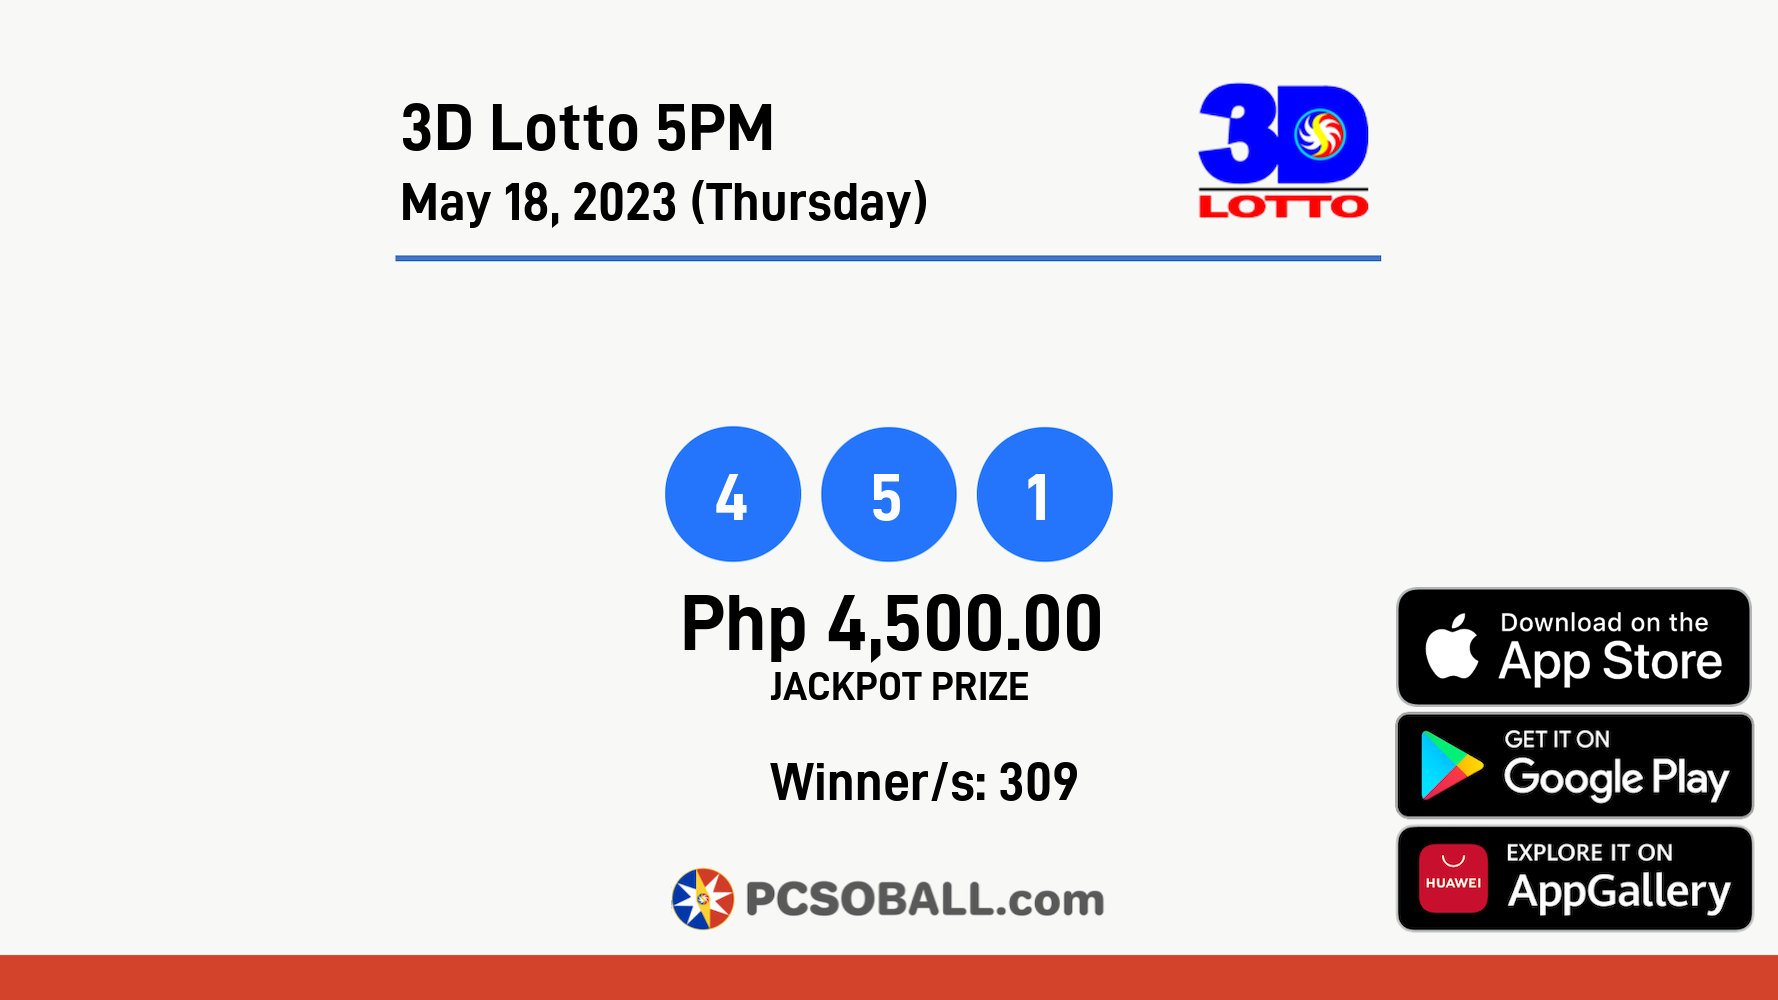 3D Lotto 5PM May 18, 2023 (Thursday) Result